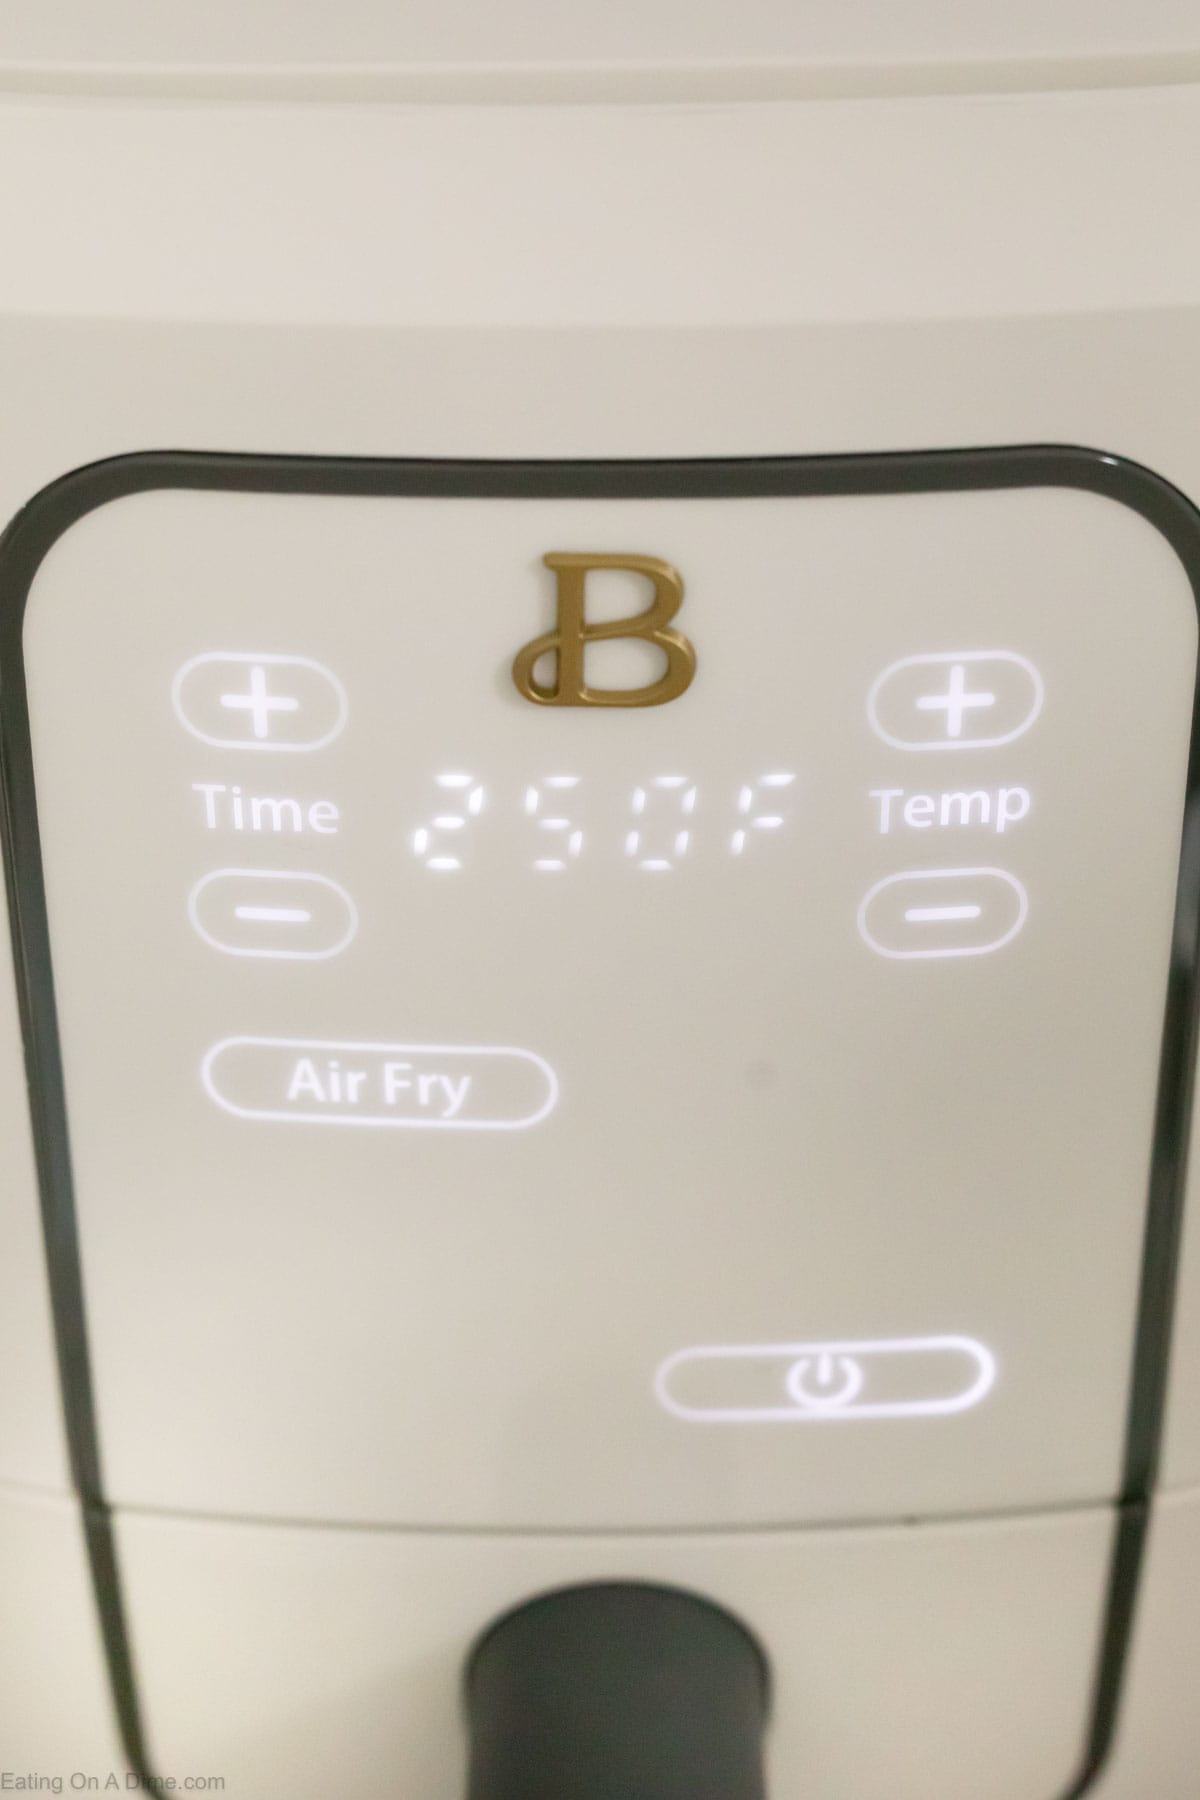 Air Fryer showing the temp